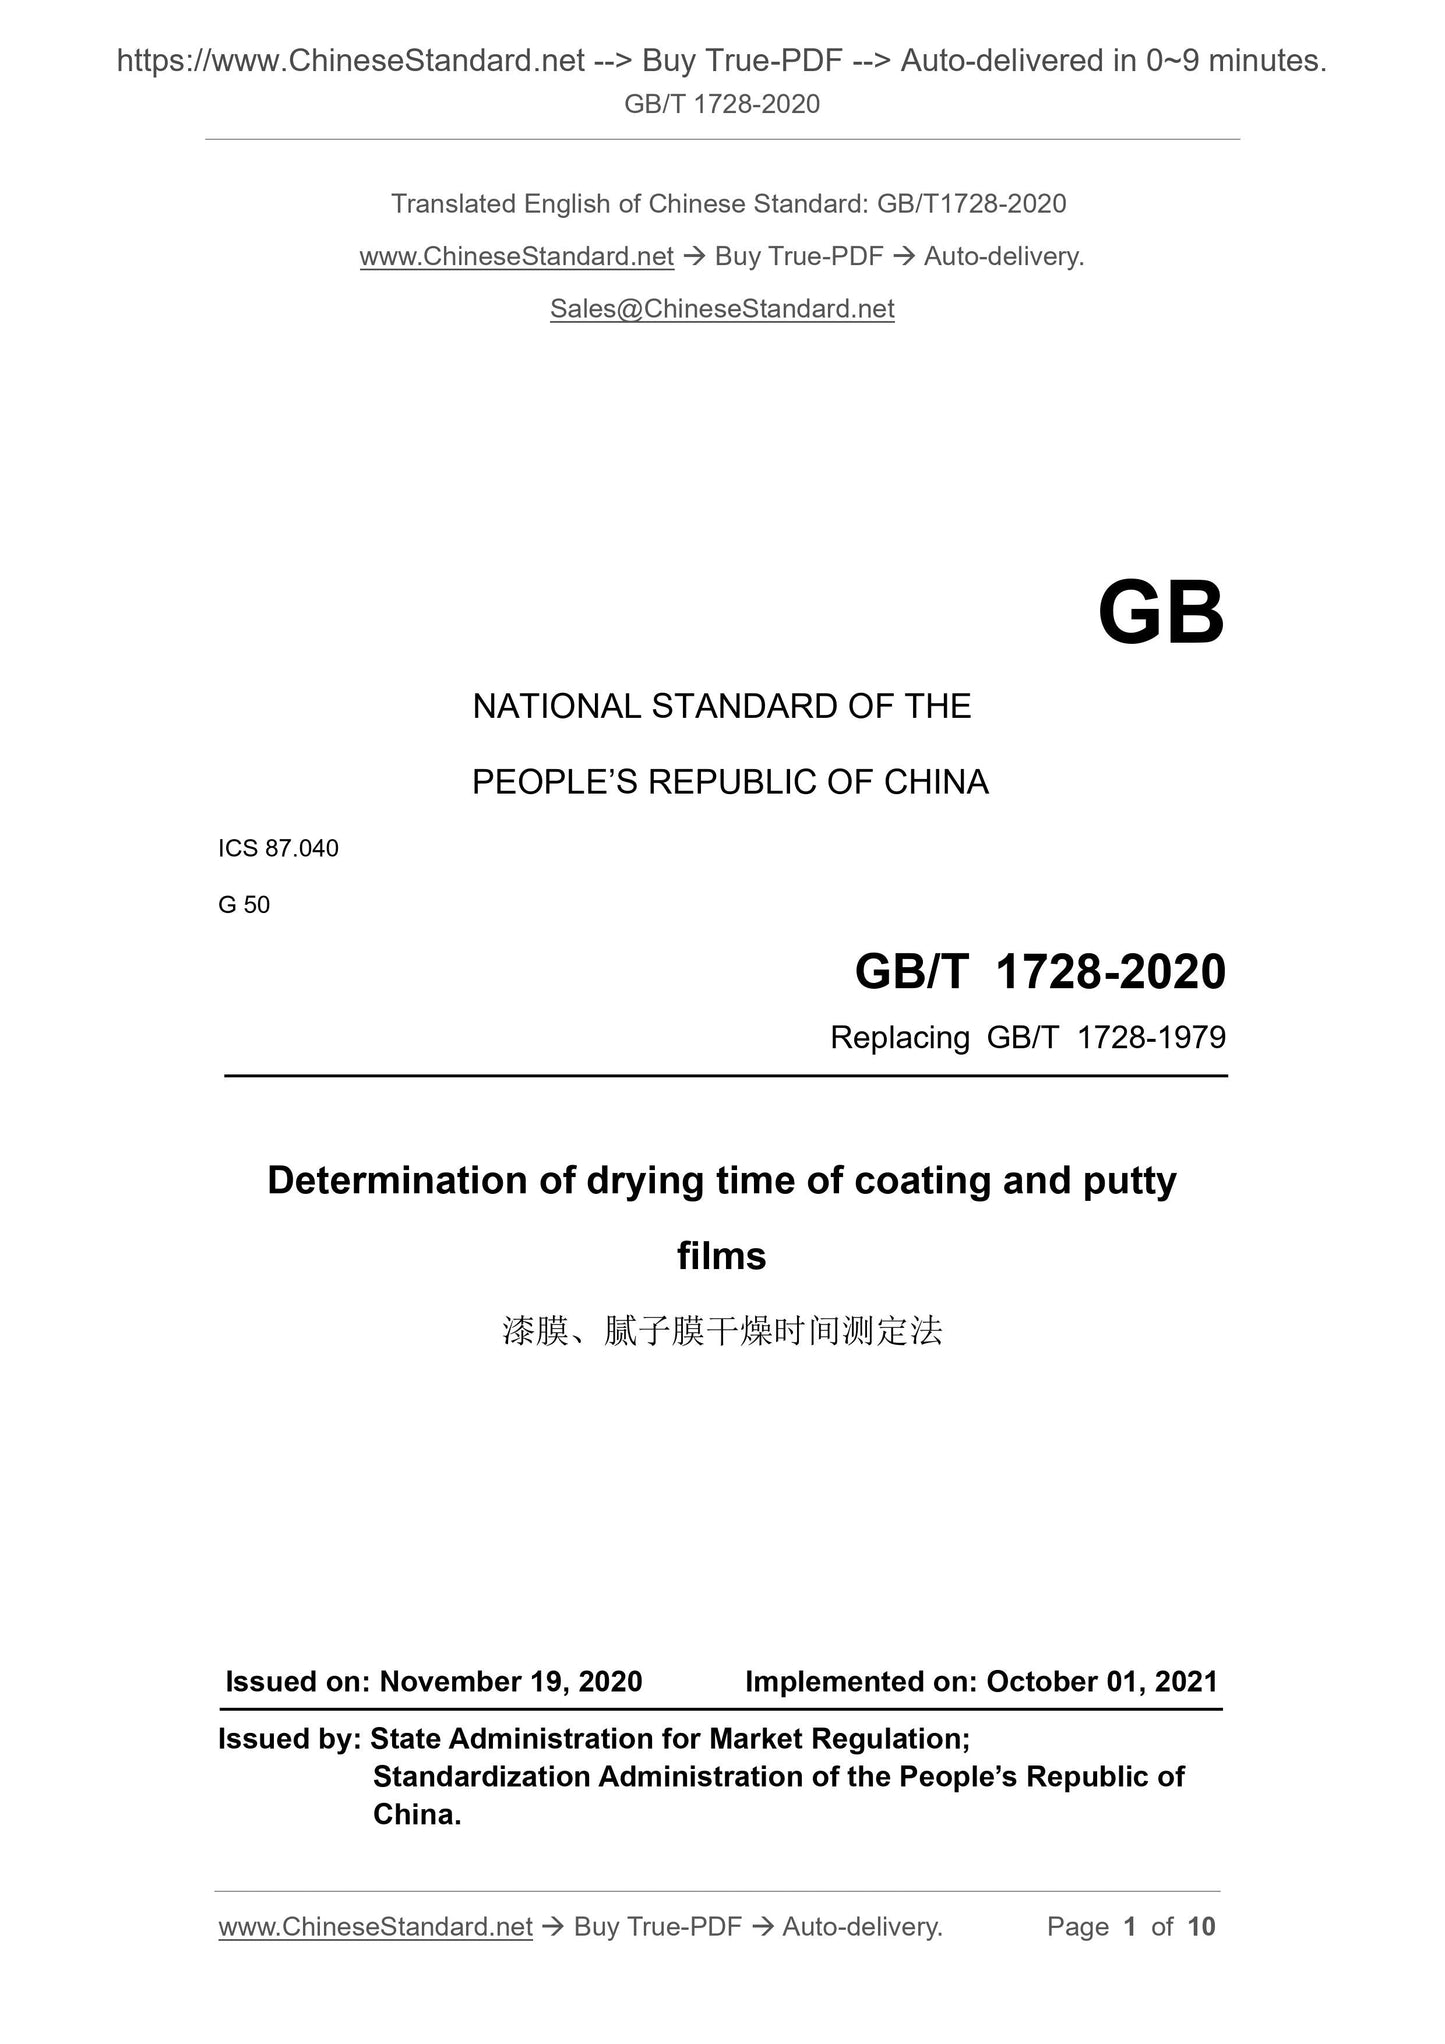 GB/T 1728-2020 Page 1